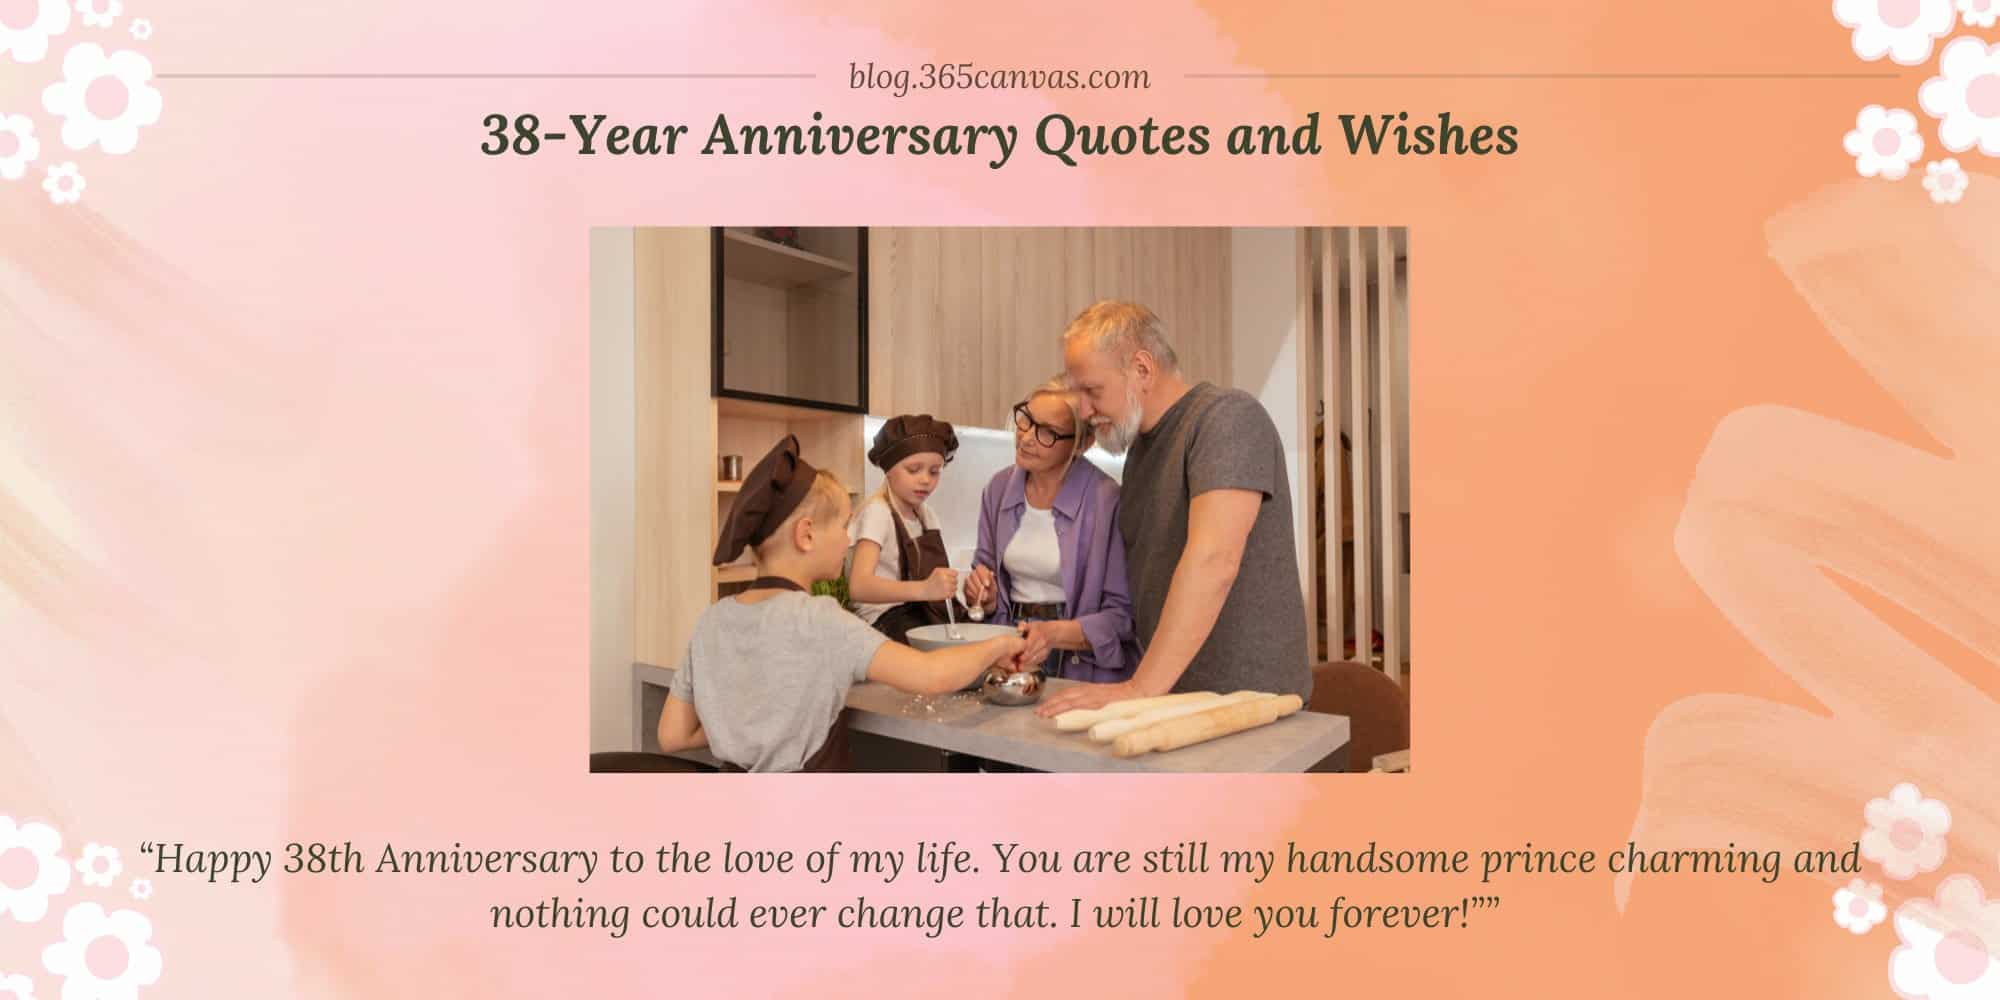 50+ Heartwarming 38th Year Luck Anniversary Quotes, Wishes and Messages